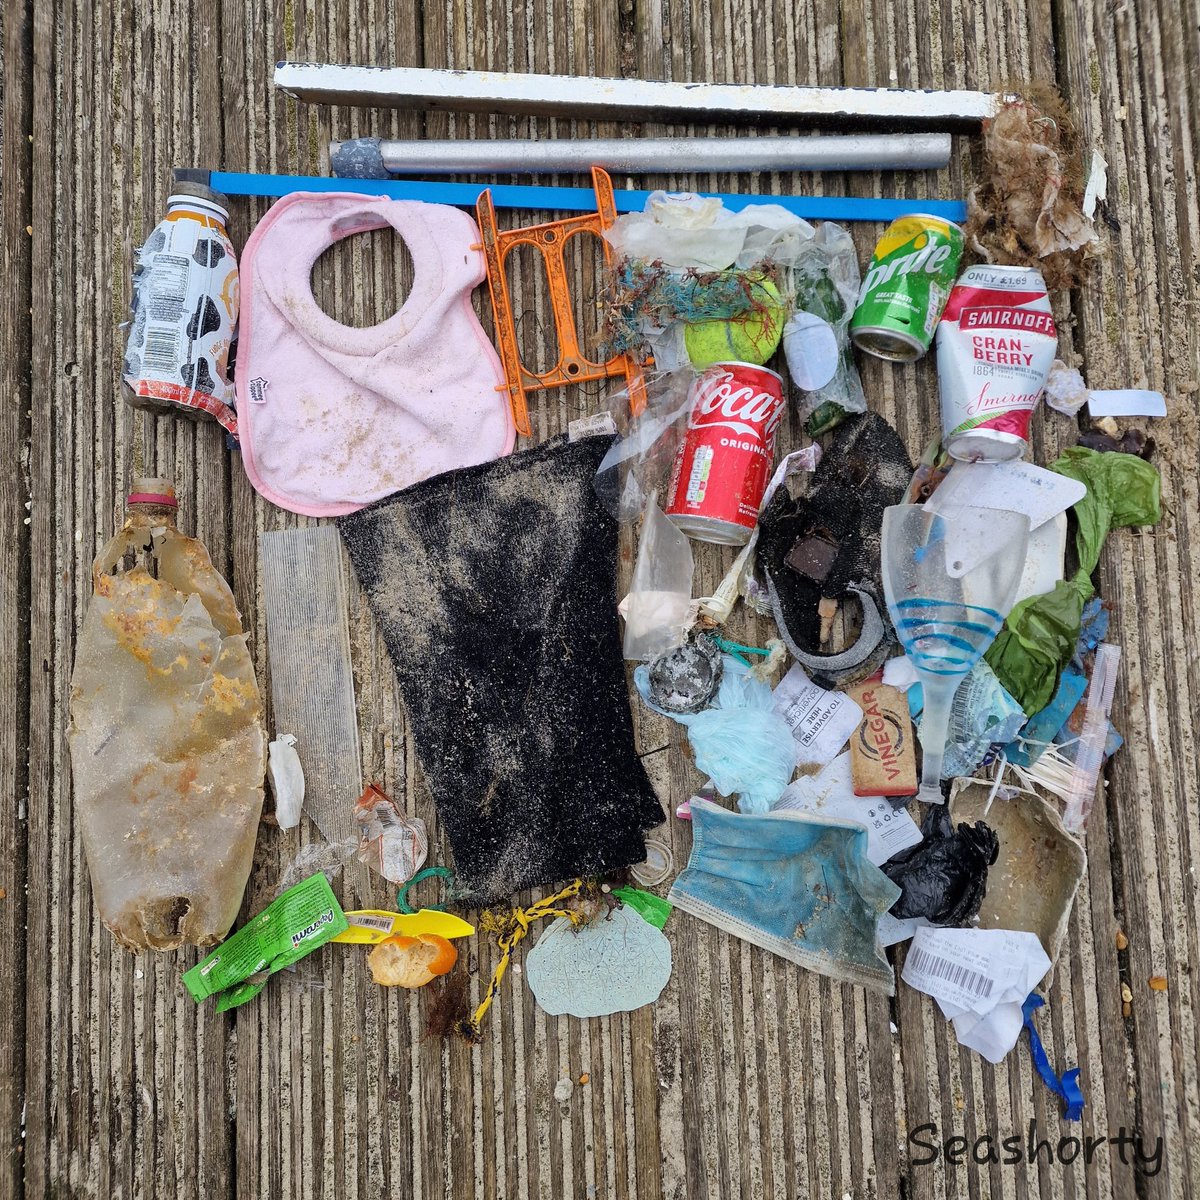 Approx. 70 pieces from today, mostly in the seaweed. 
#Plastic #MarinePlastic #PlasticPollution #2MinuteBeachClean #LitterFreeDorset